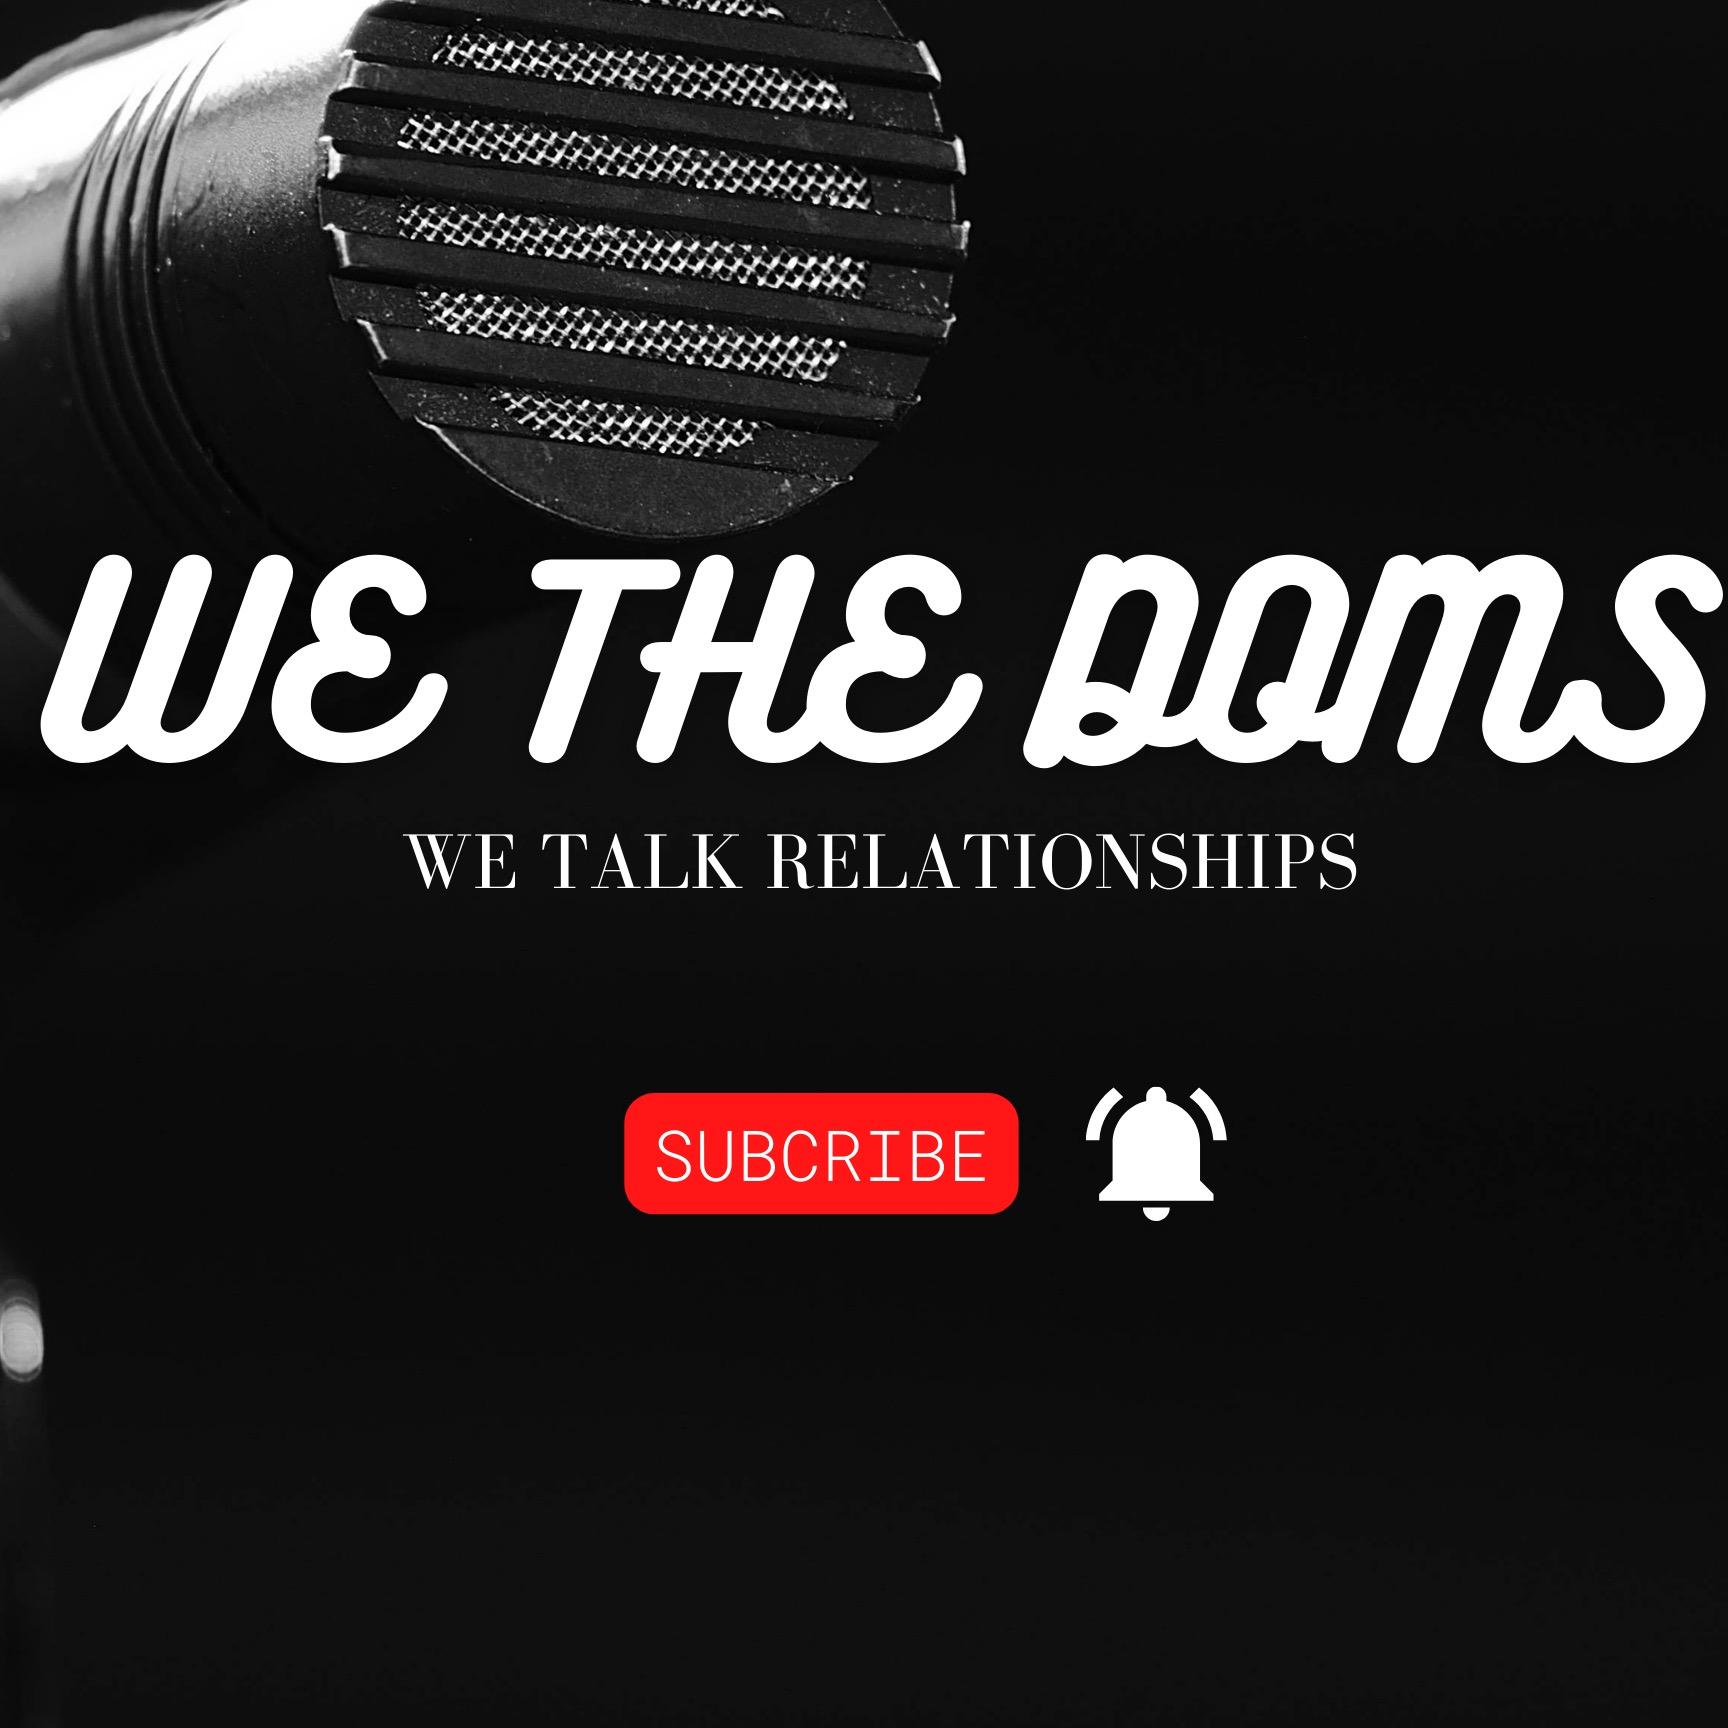 We The Doms